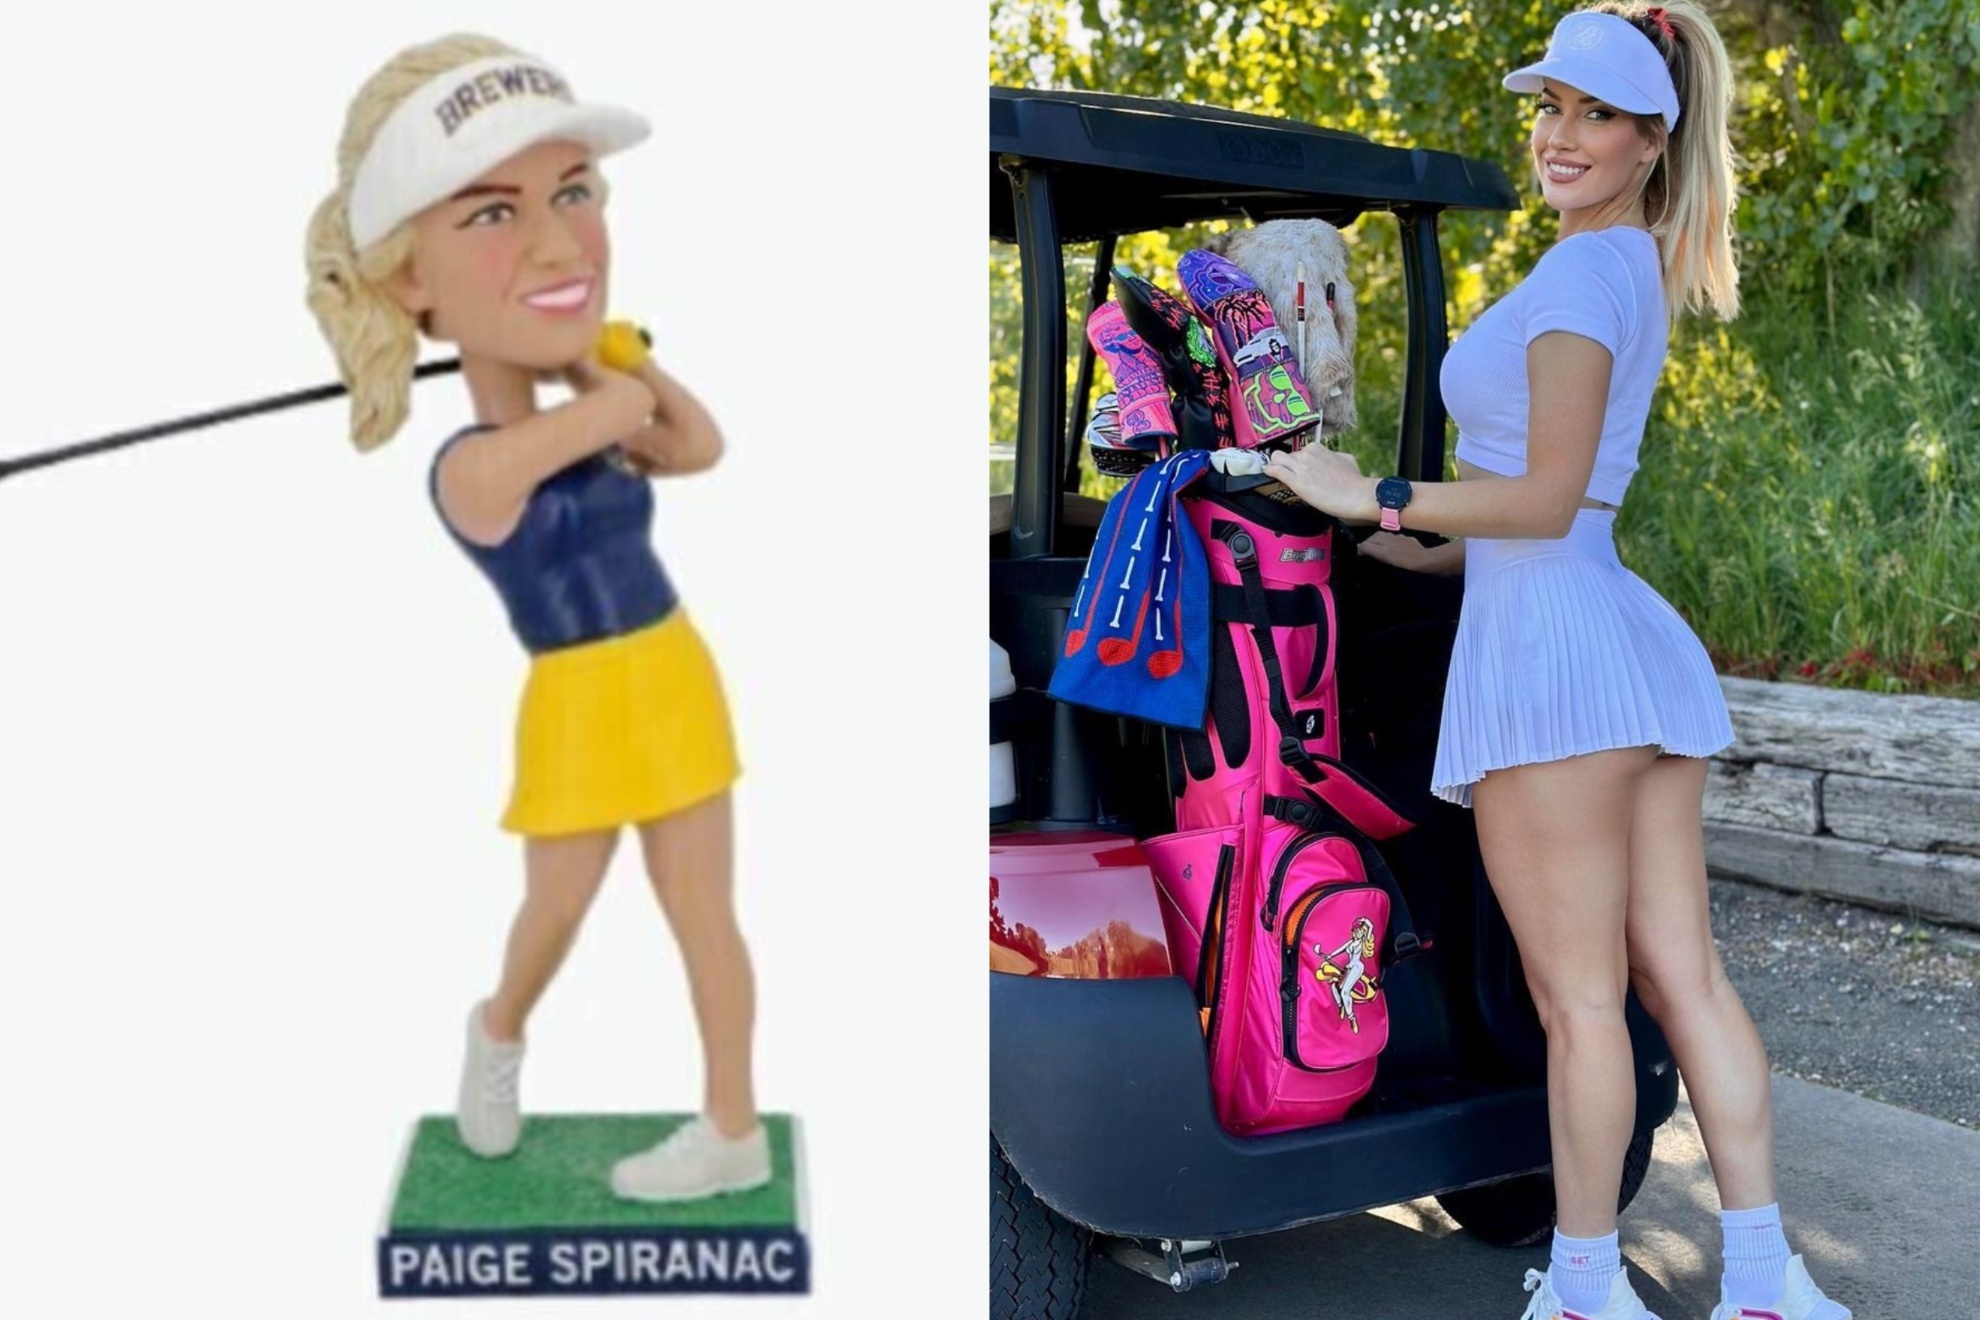 Mashup of Paige Spiranac and her Brewers Bobblehead.